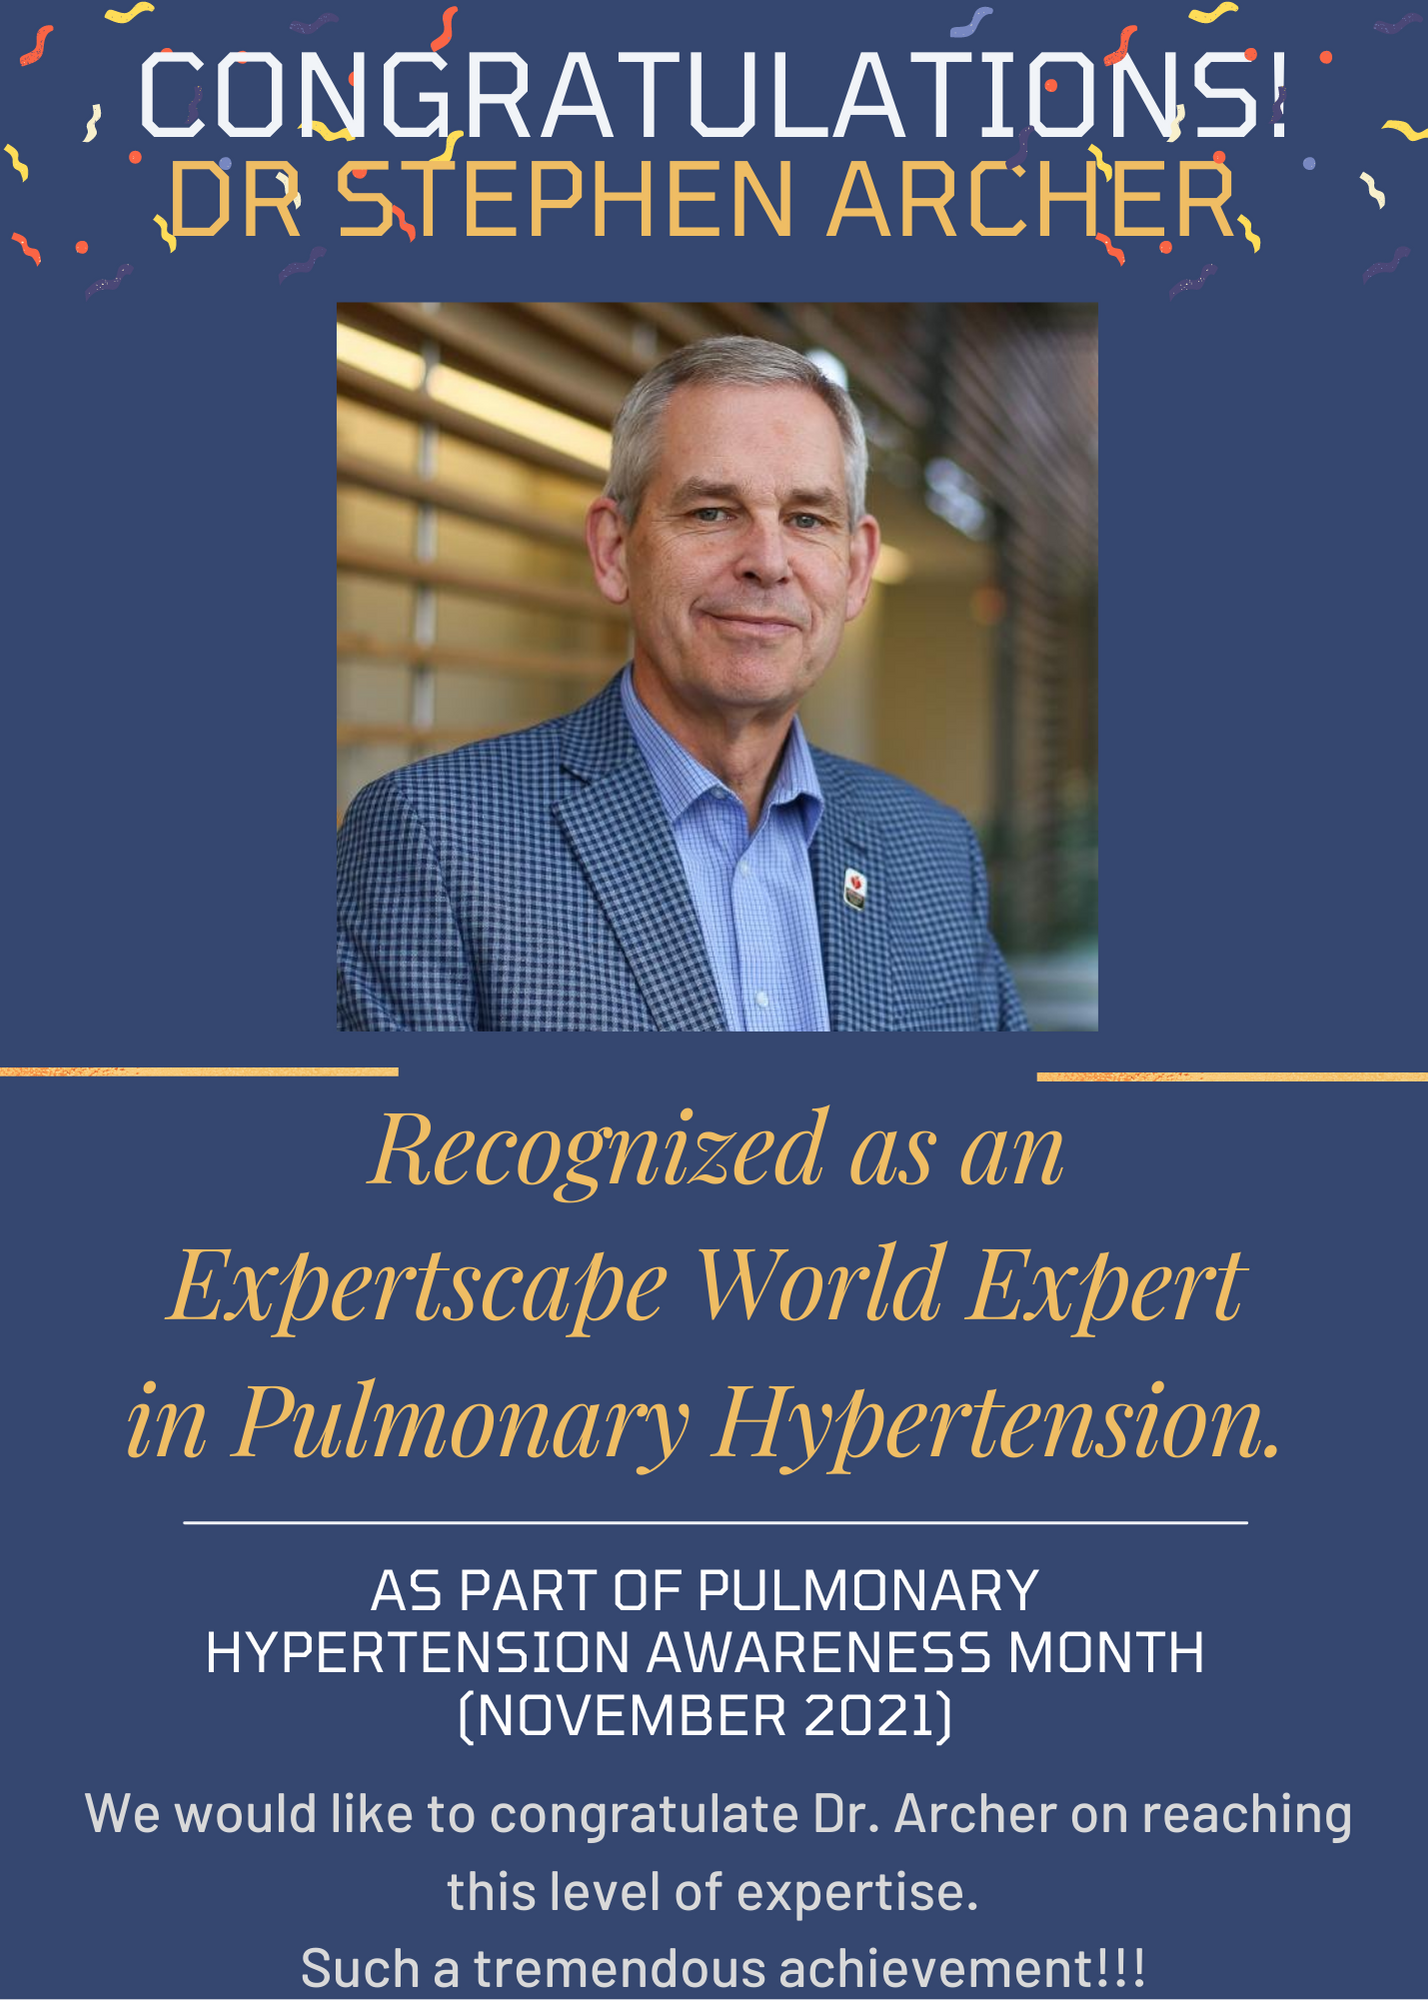 Announcement poster- Congratulations Dr. Stephen Archer on his recognition as an Expertscape World Expert in Pulmonary Hypertension 